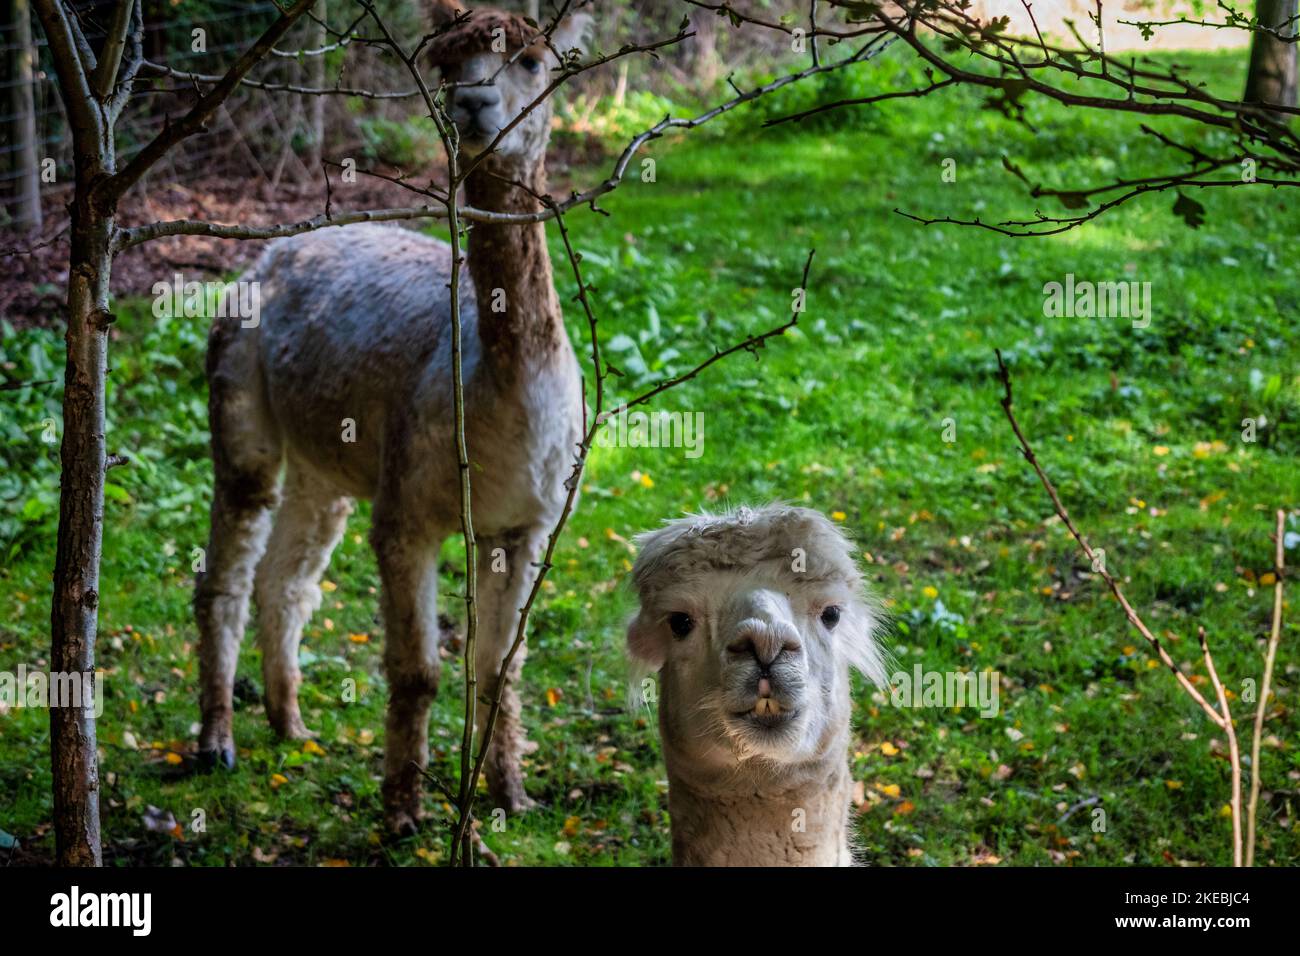 Two llamas (or alpacas} in a field in the UK Stock Photo